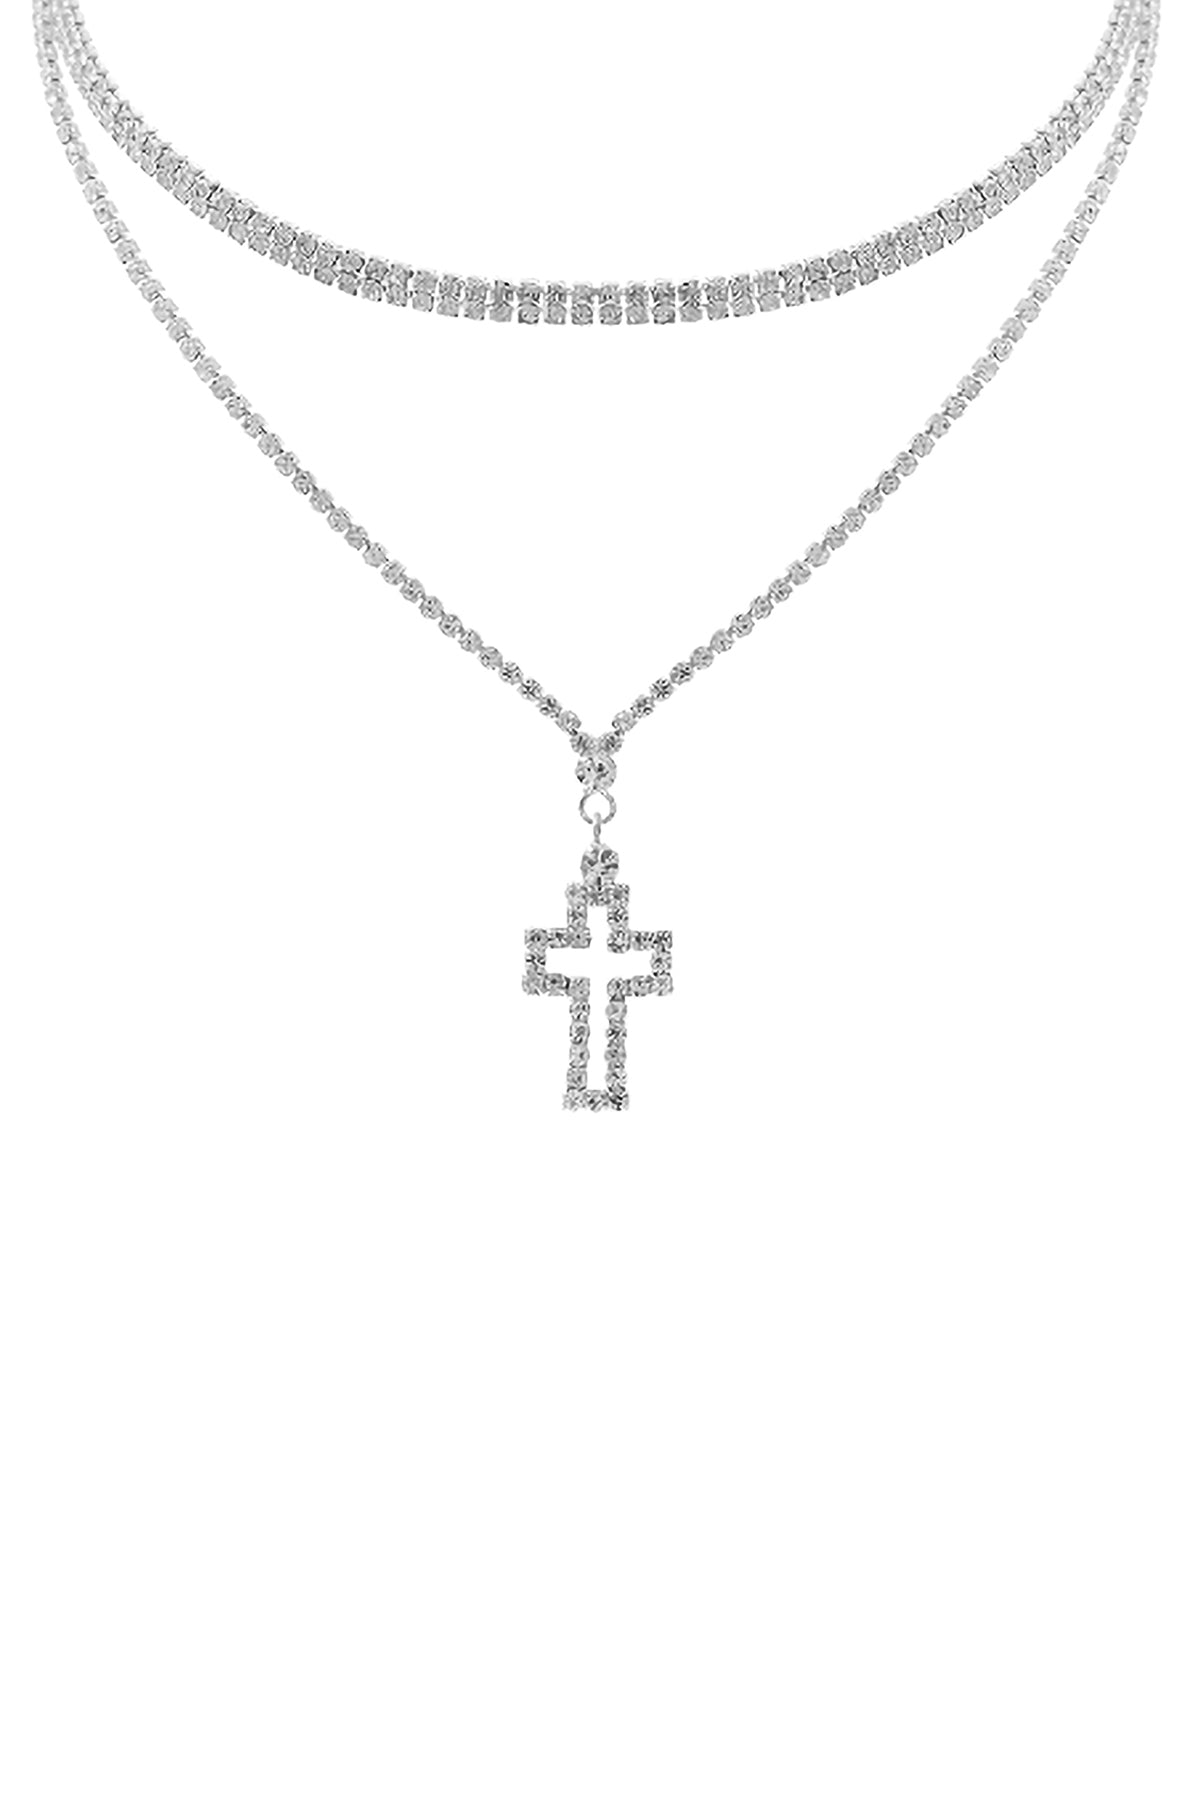 CROSS RHINESTONE CHOKER/COLLAR LAYERED NECKLACE (NOW $2.00 ONLY!)